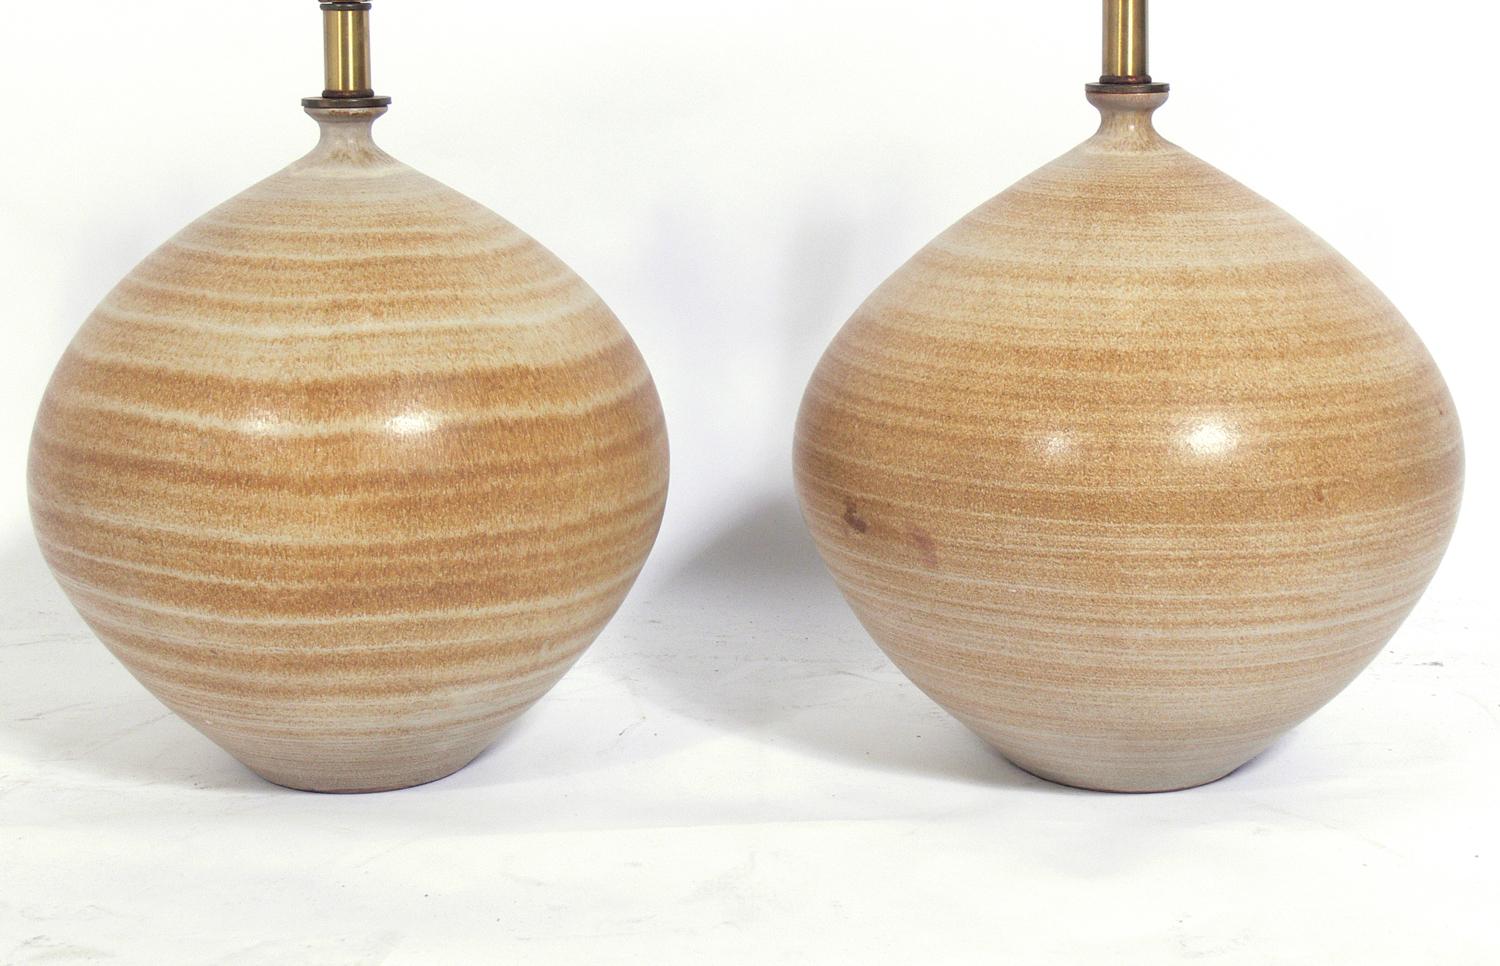 Pair of sculptural ceramic lamps by Design Technics, American, circa 1960s. Signed with DT stamp near cords. Sculptural bulbous form with beautiful striated decoration and nice glaze. The price noted below Includes the shades. Rewired and ready to